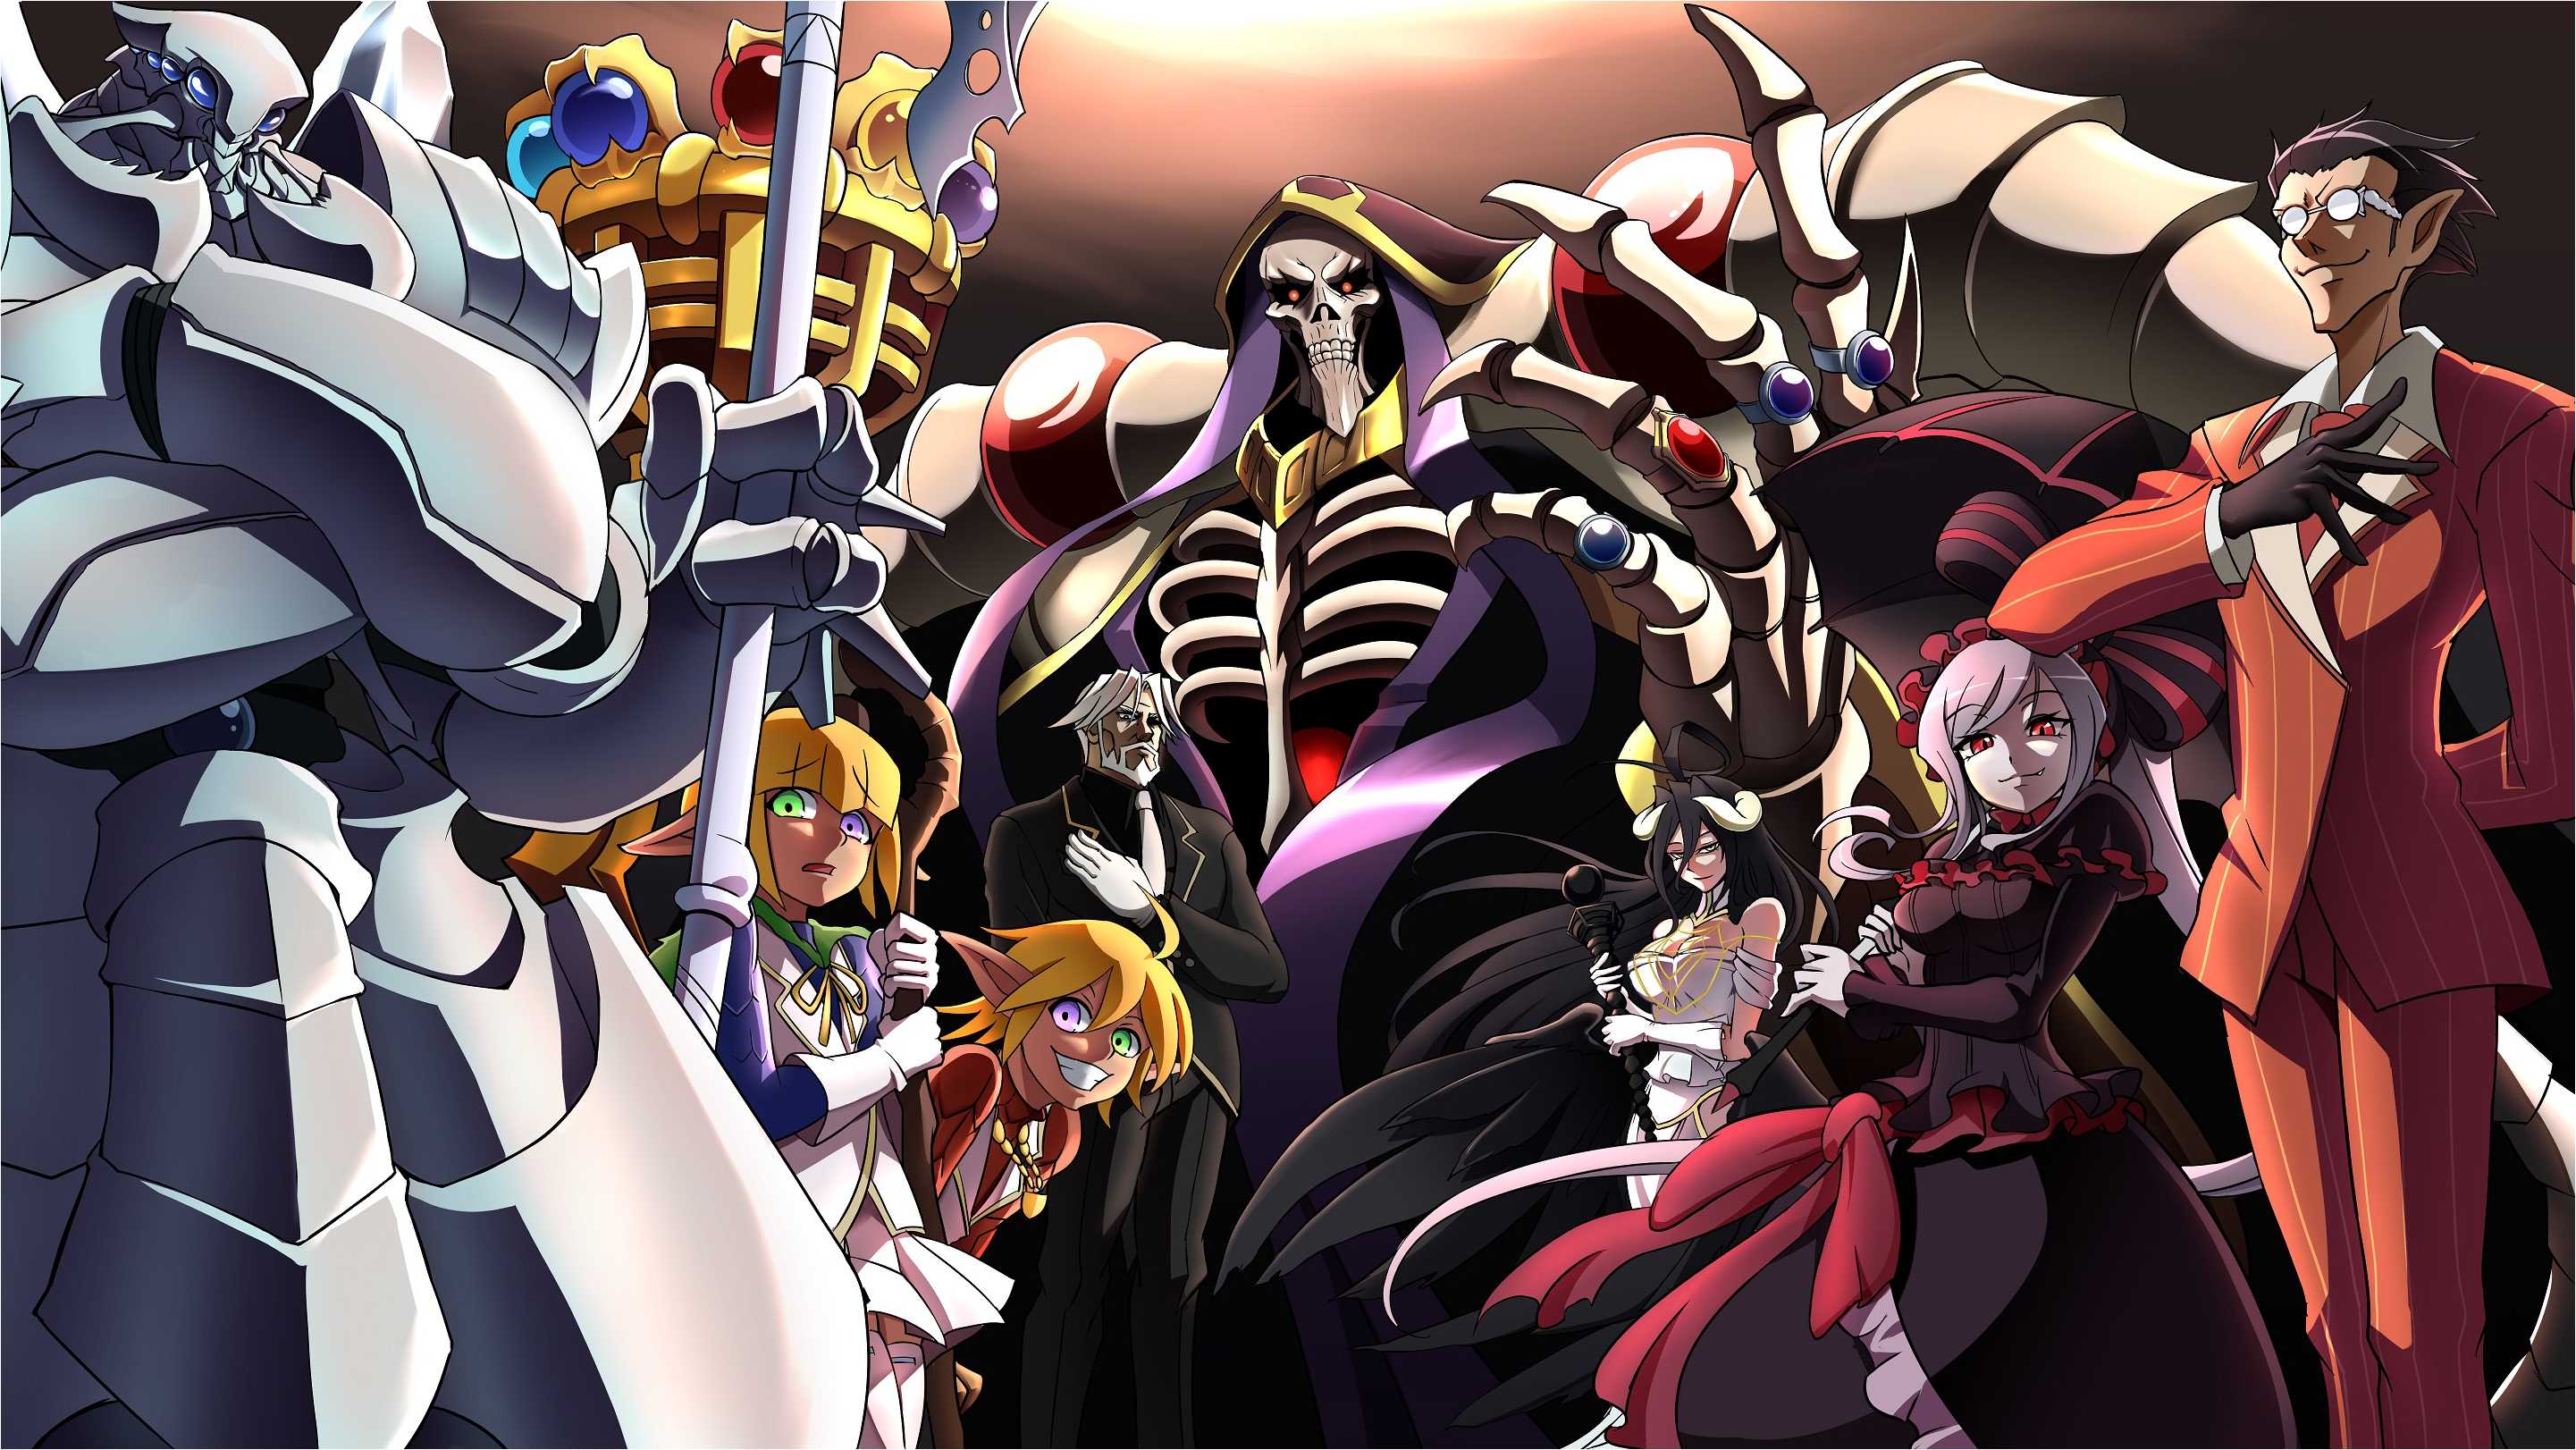 overlord wallpaper for computer. overlord